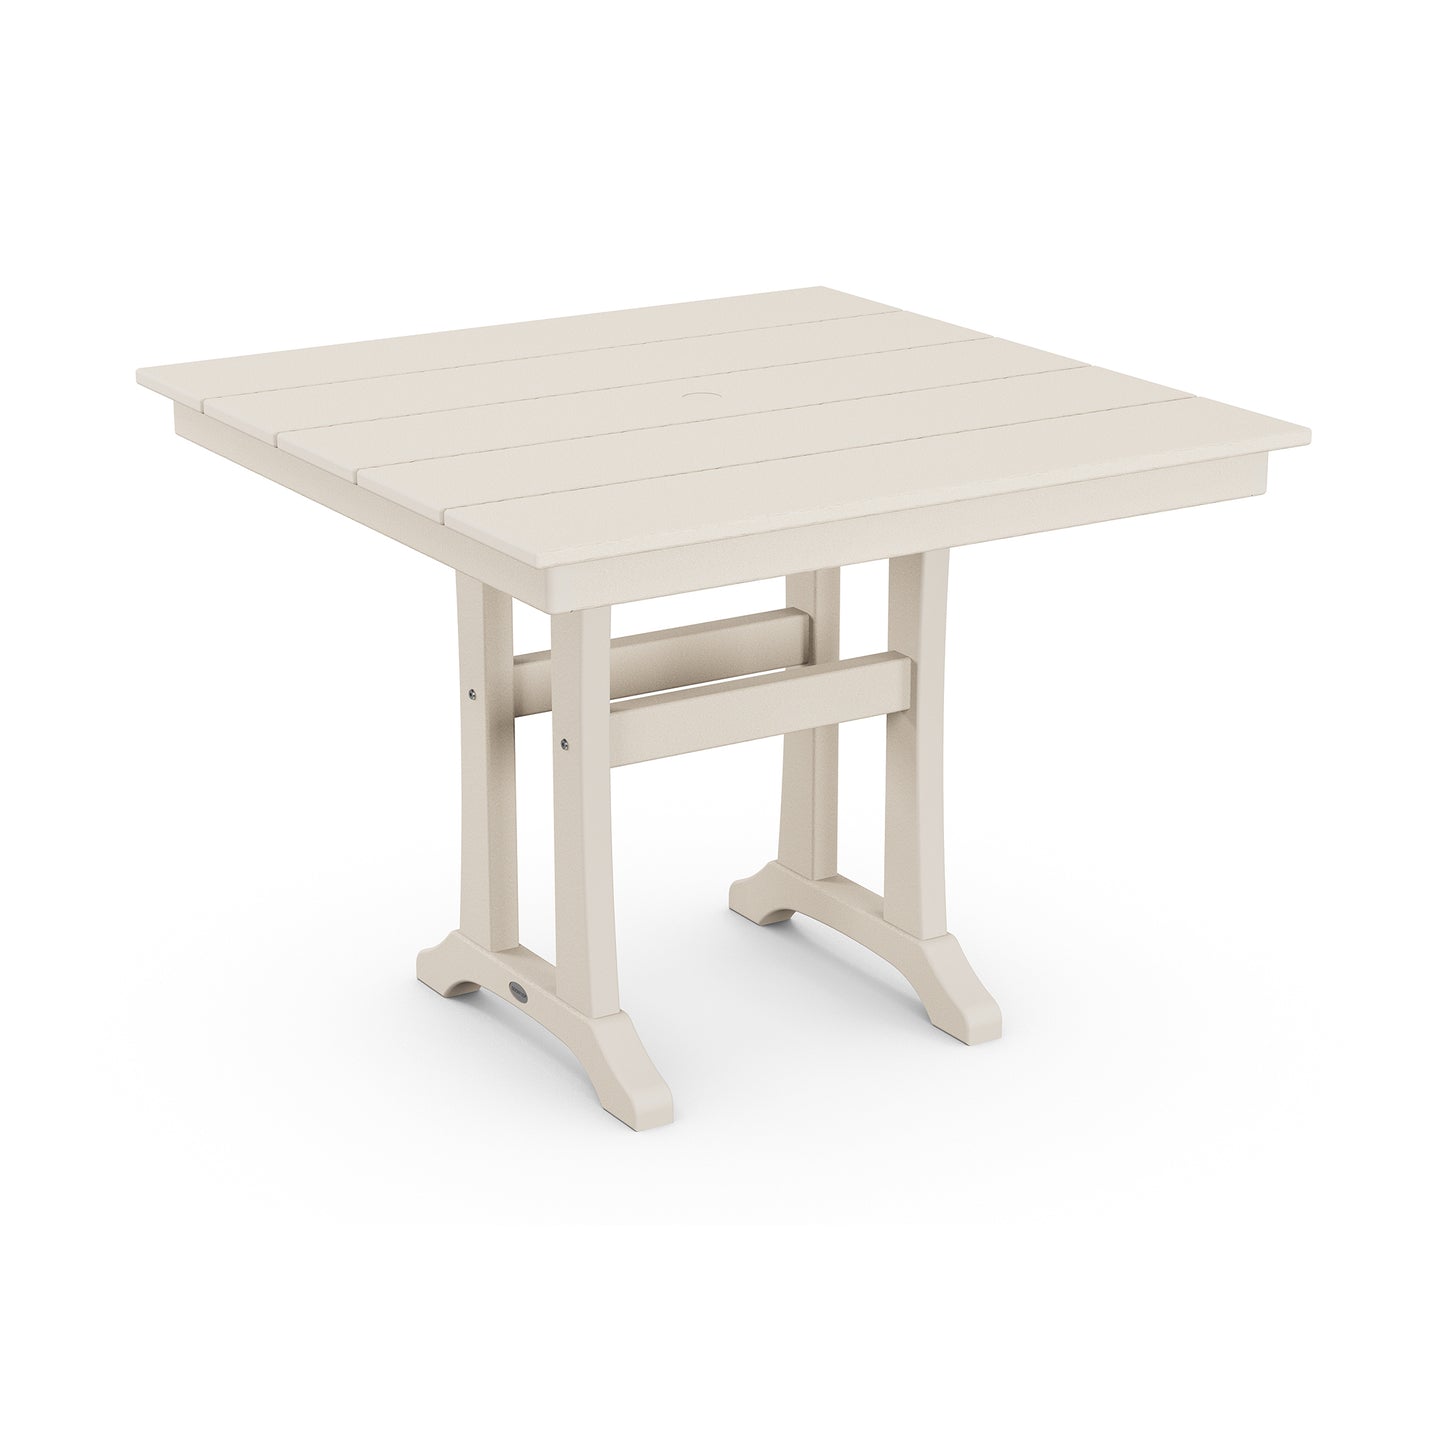 A modern, cream-colored POLYWOOD Farmhouse Trestle 37" Dining Table with a simple, sturdy design, featuring rectangular top, slats, and angled legs. The table also includes a lower shelf for additional storage.